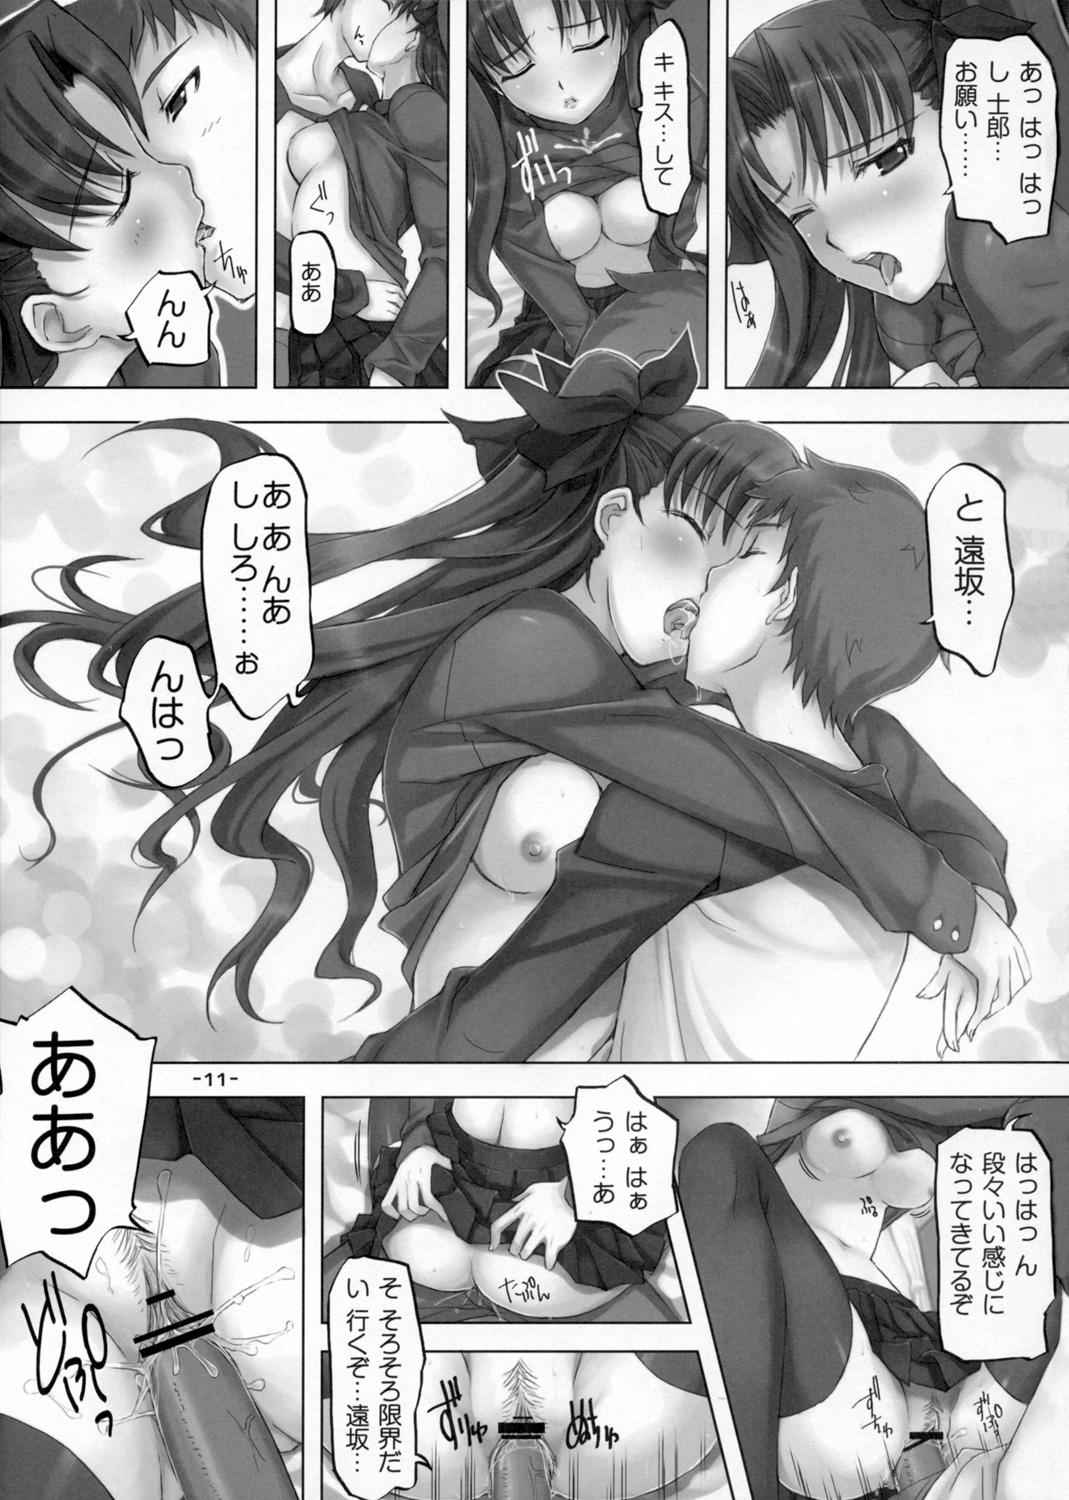 Wet Cunts DAILY LIFE - Fate stay night Fate hollow ataraxia Transgender - Page 10